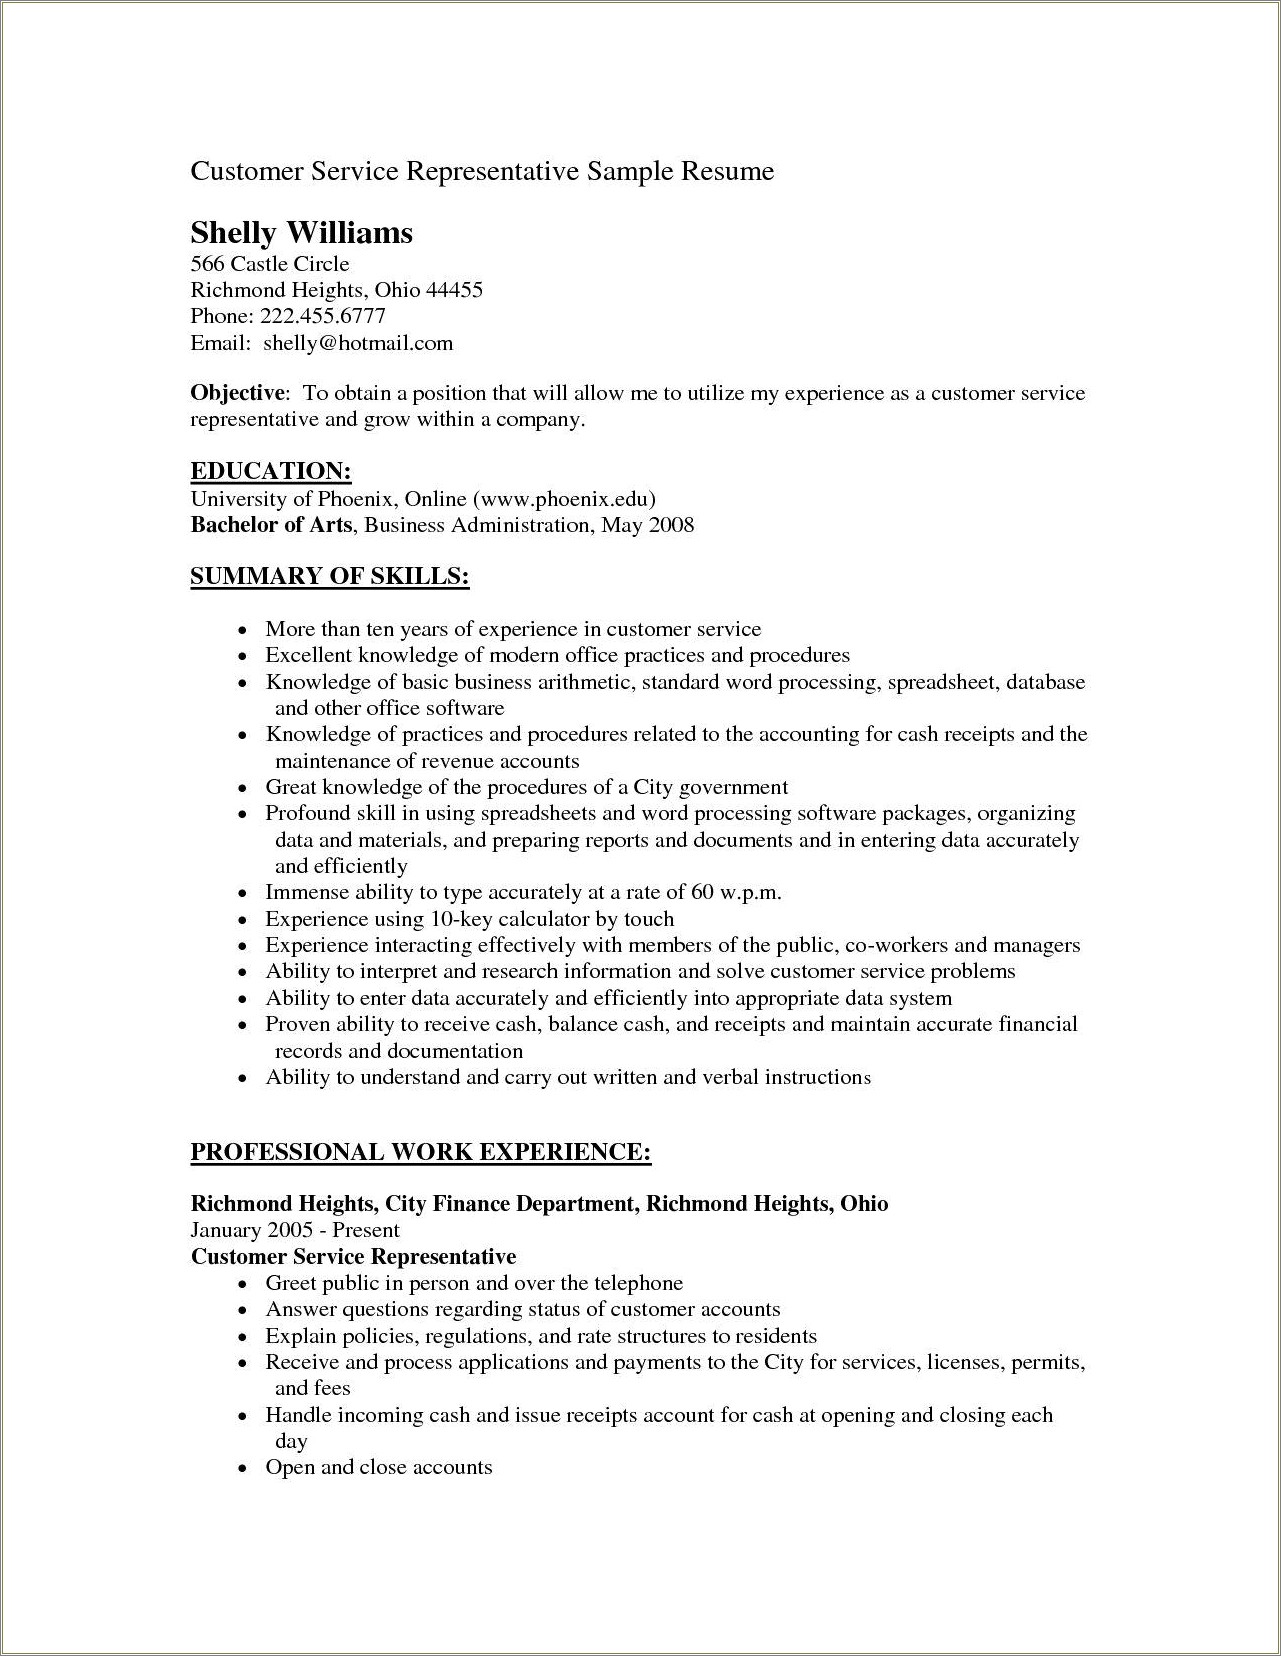 Objective Statement For Resume For Customer Service